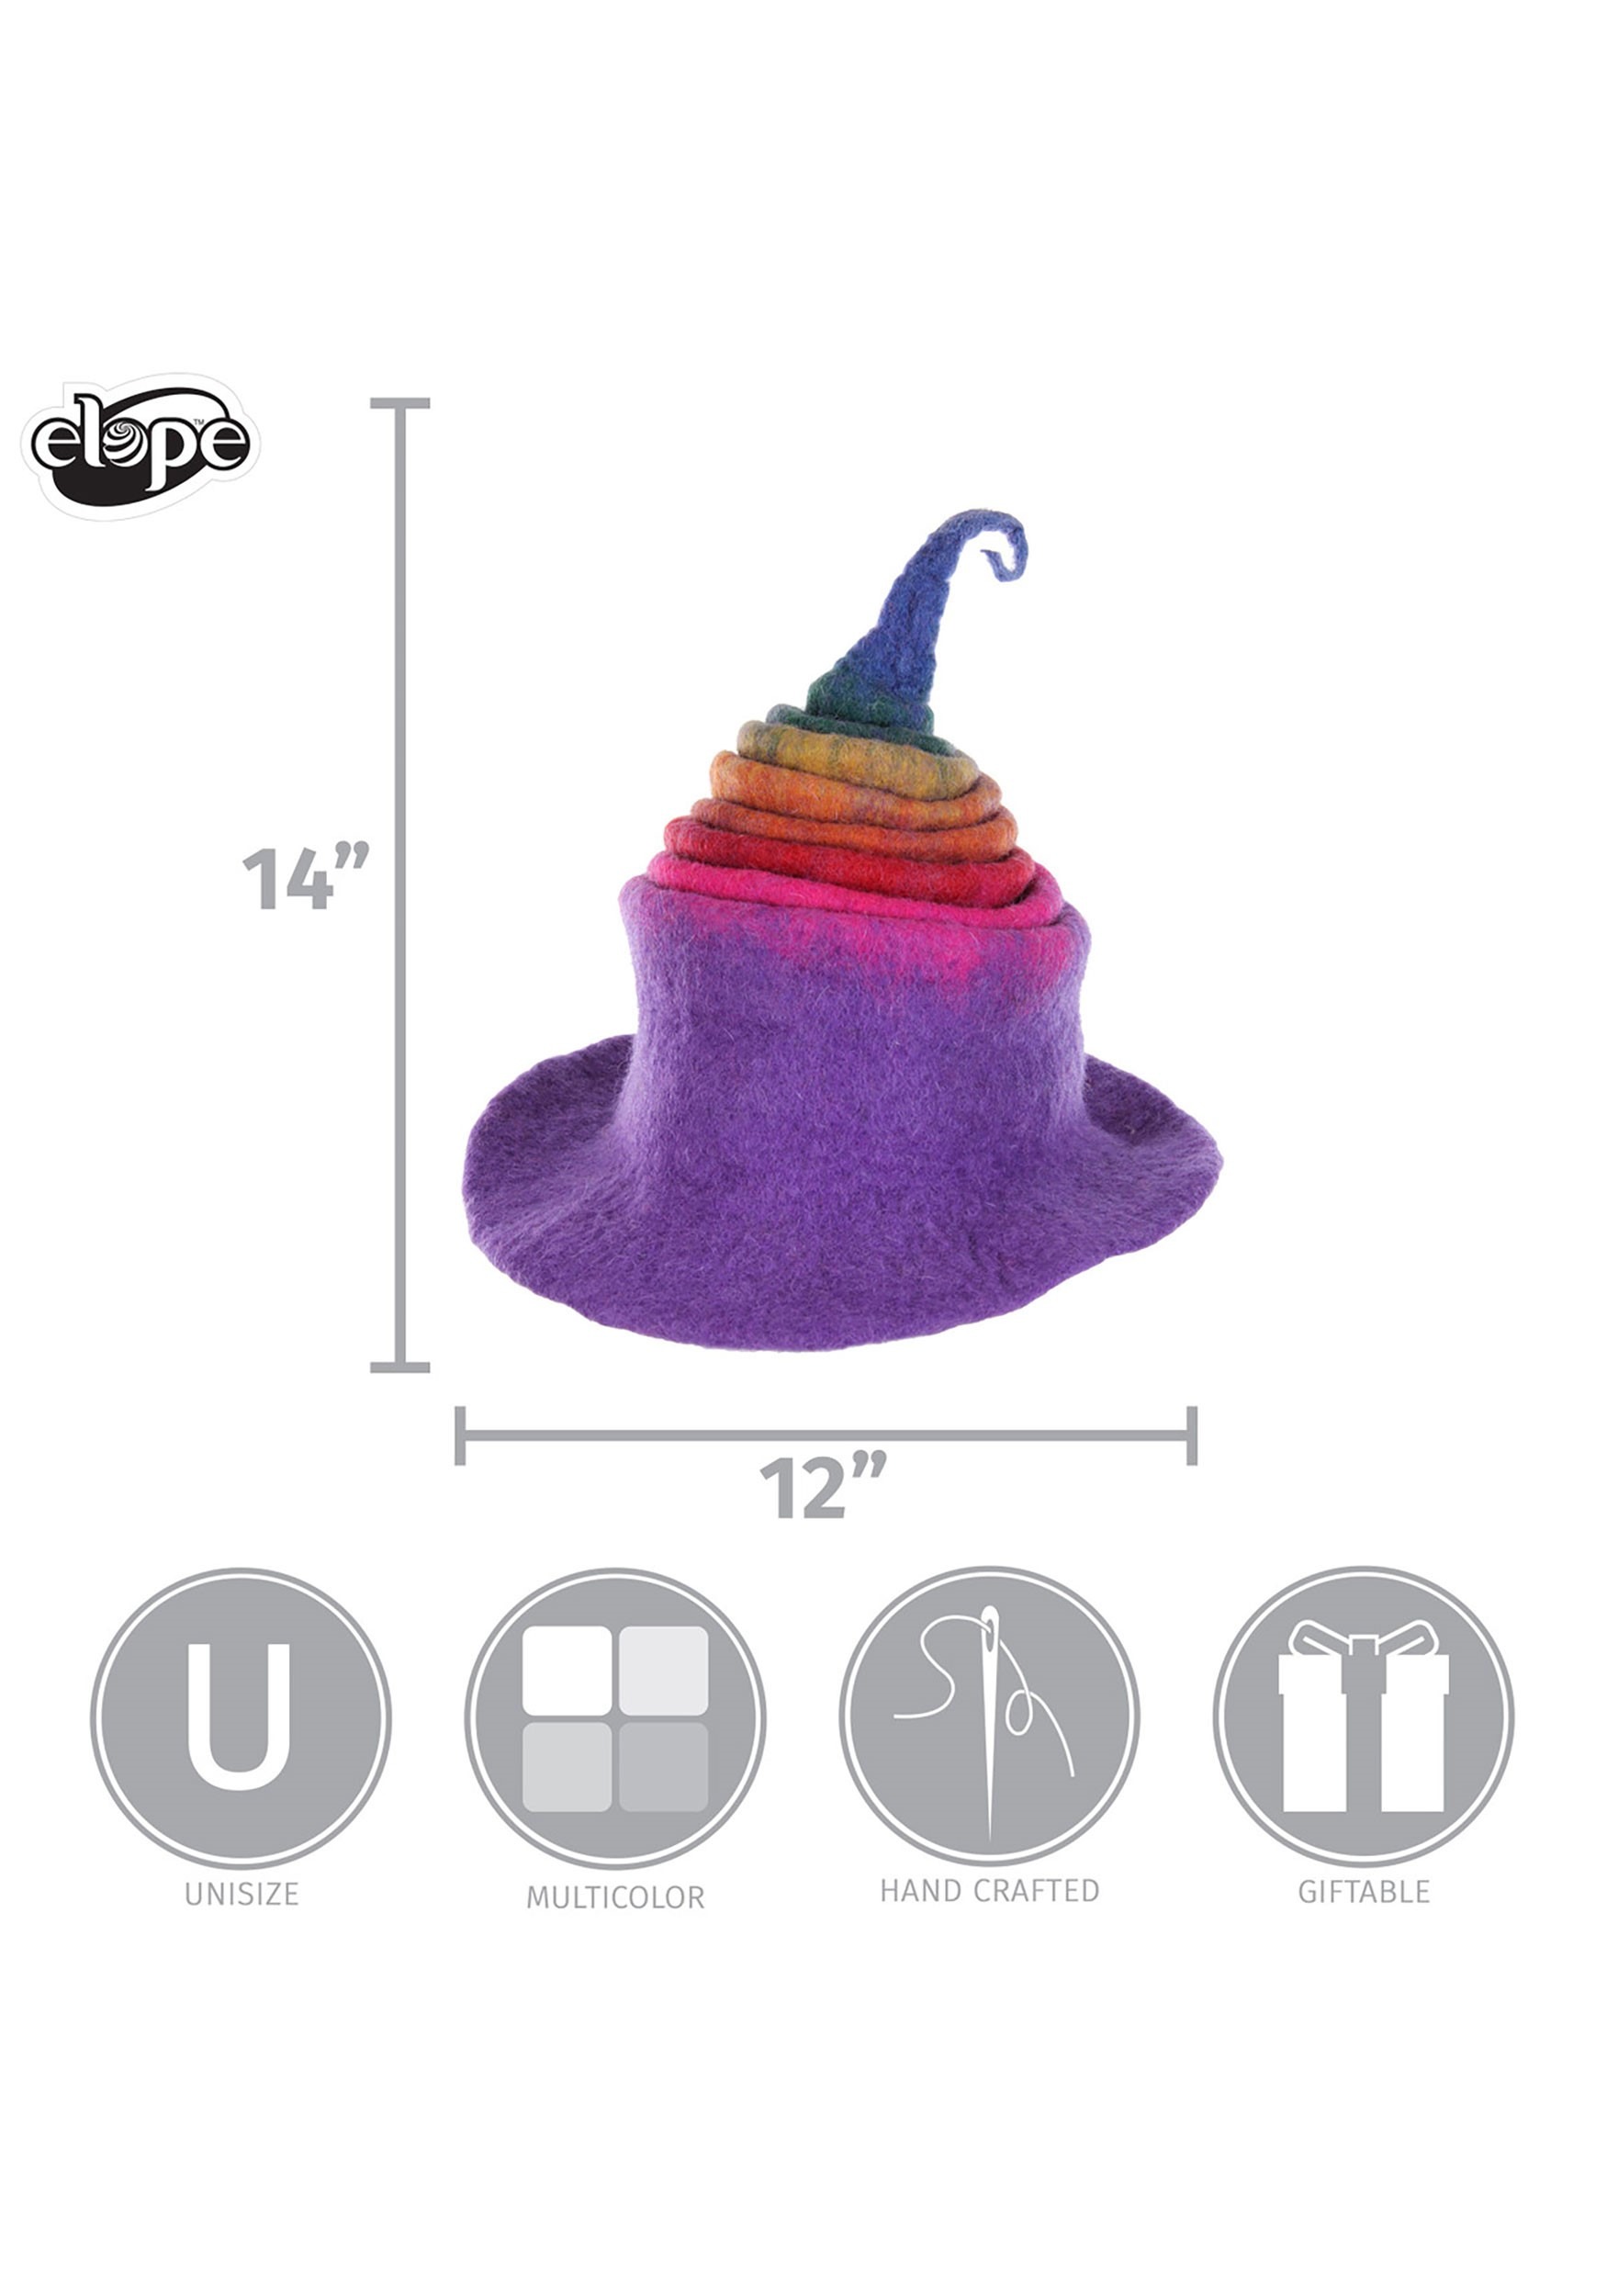 Heartfelted Rainbow Borealis Witch Costume Hat